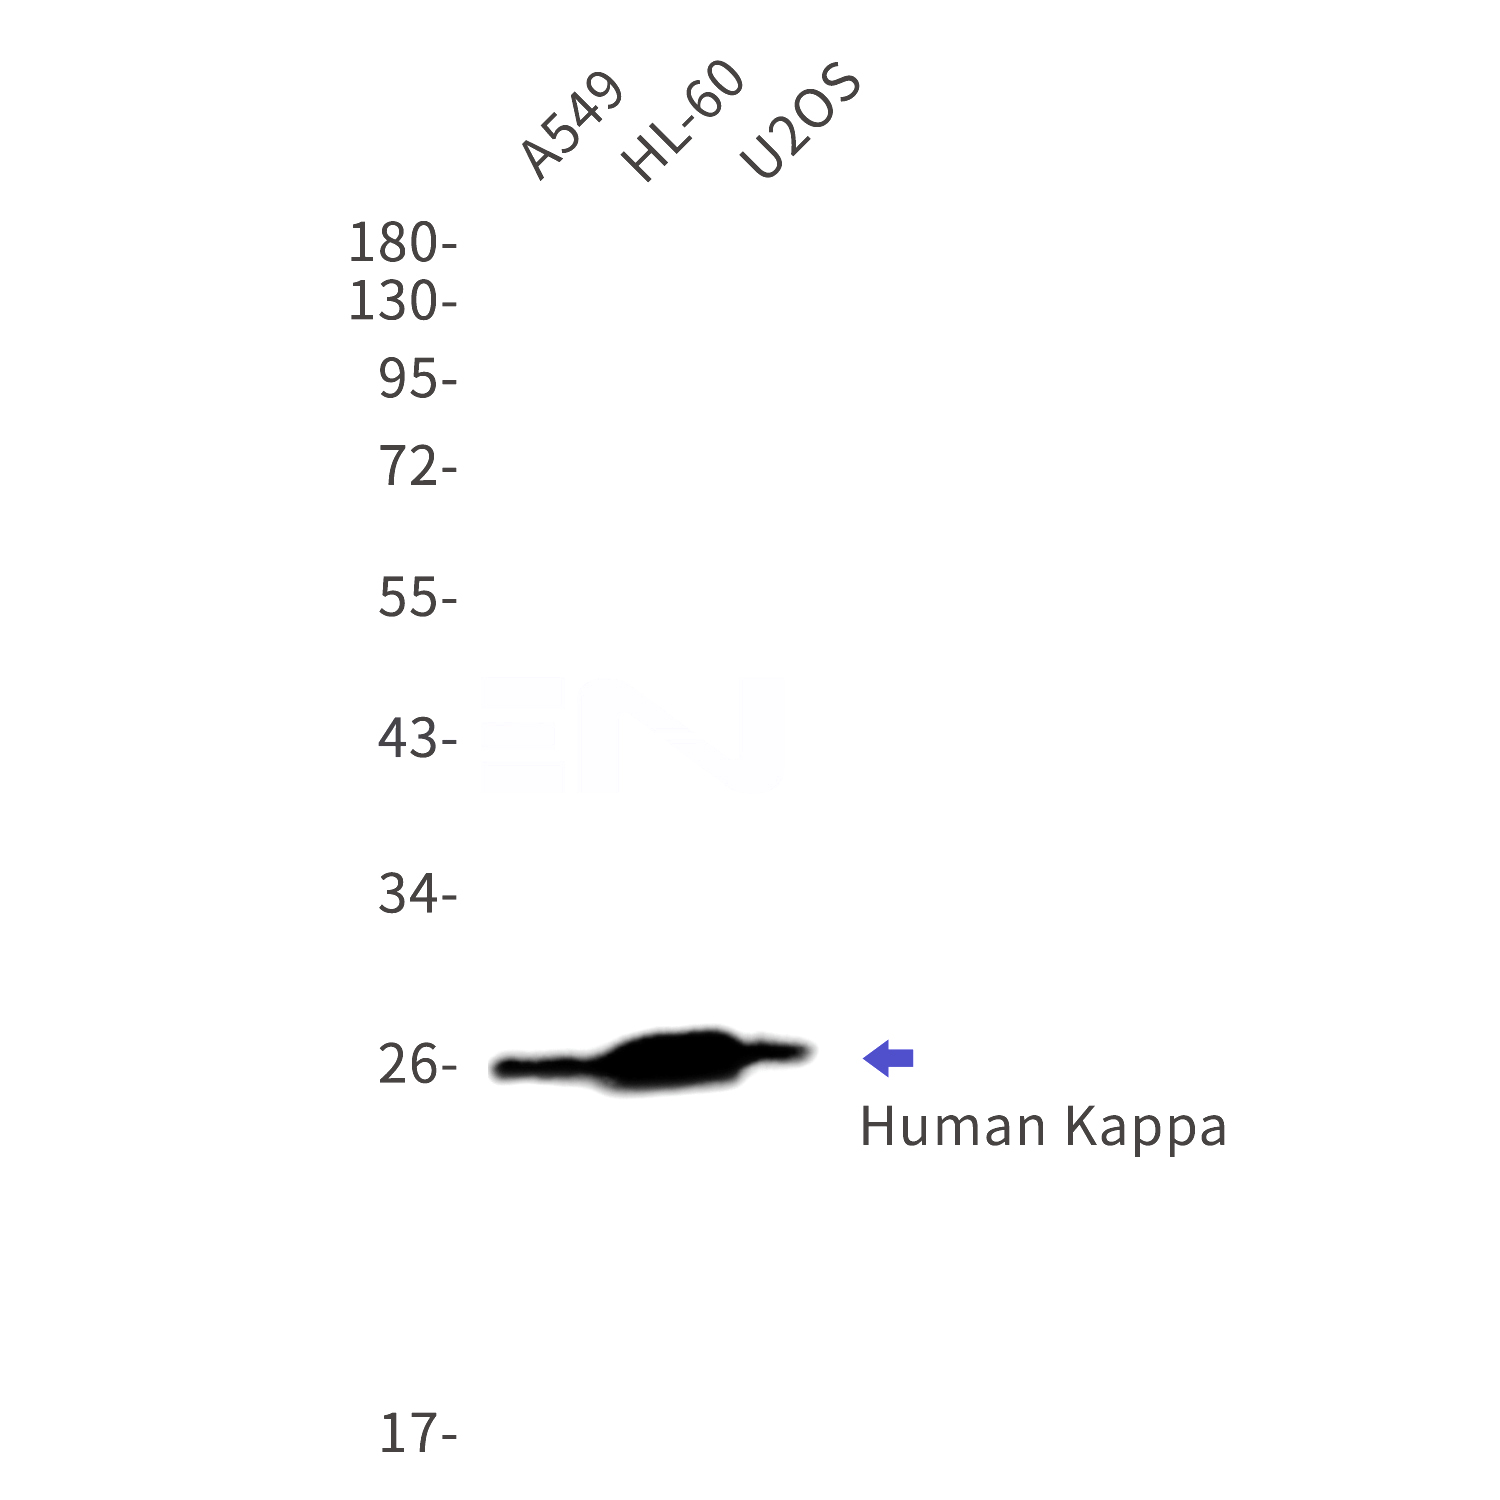 Western blot detection of Human Kappa in A549,HL-60,U2OS cell lysates using Human Kappa Rabbit mAb(1:1000 diluted).Observed band size:26kDa.